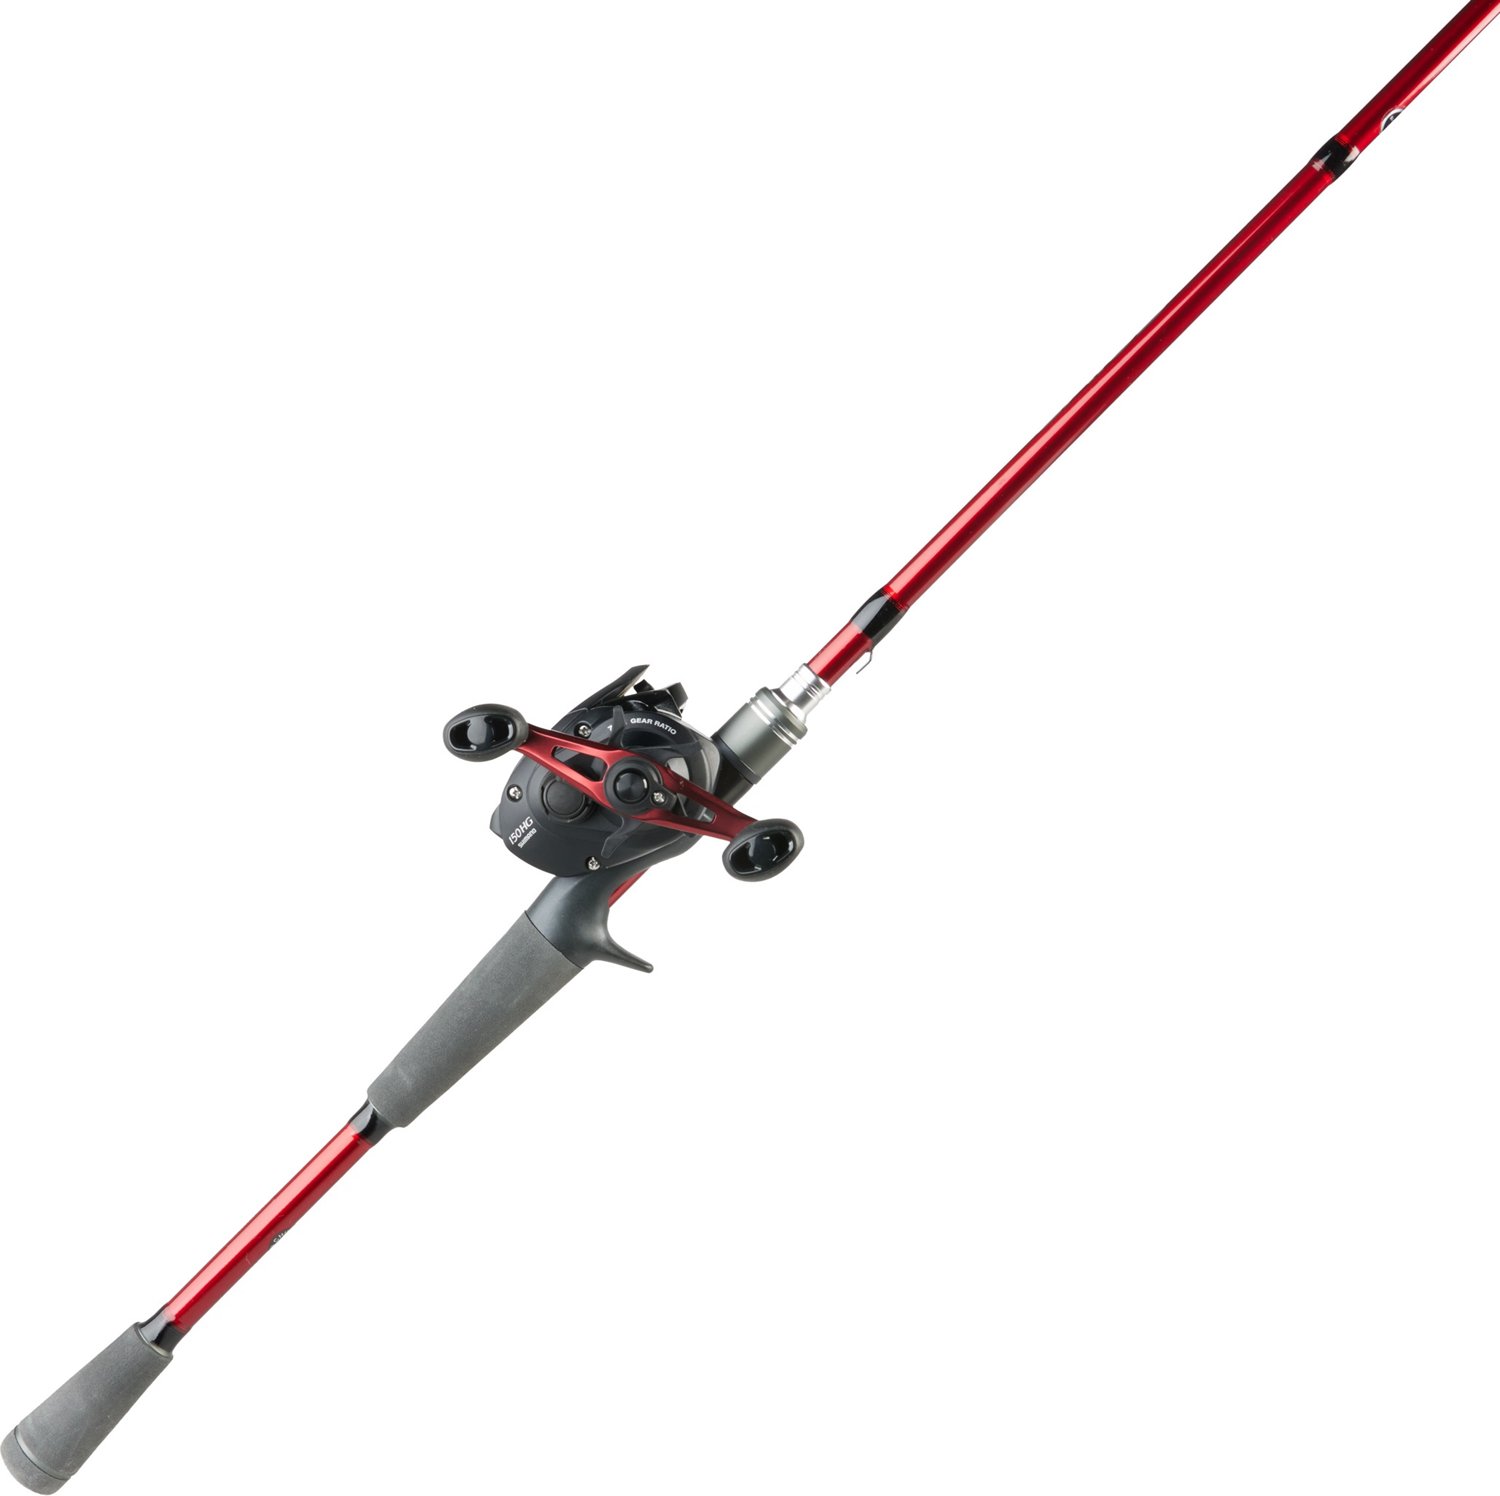 7 ft 6 in Item Medium Heavy Power Fishing Rod & Reel Combos for sale